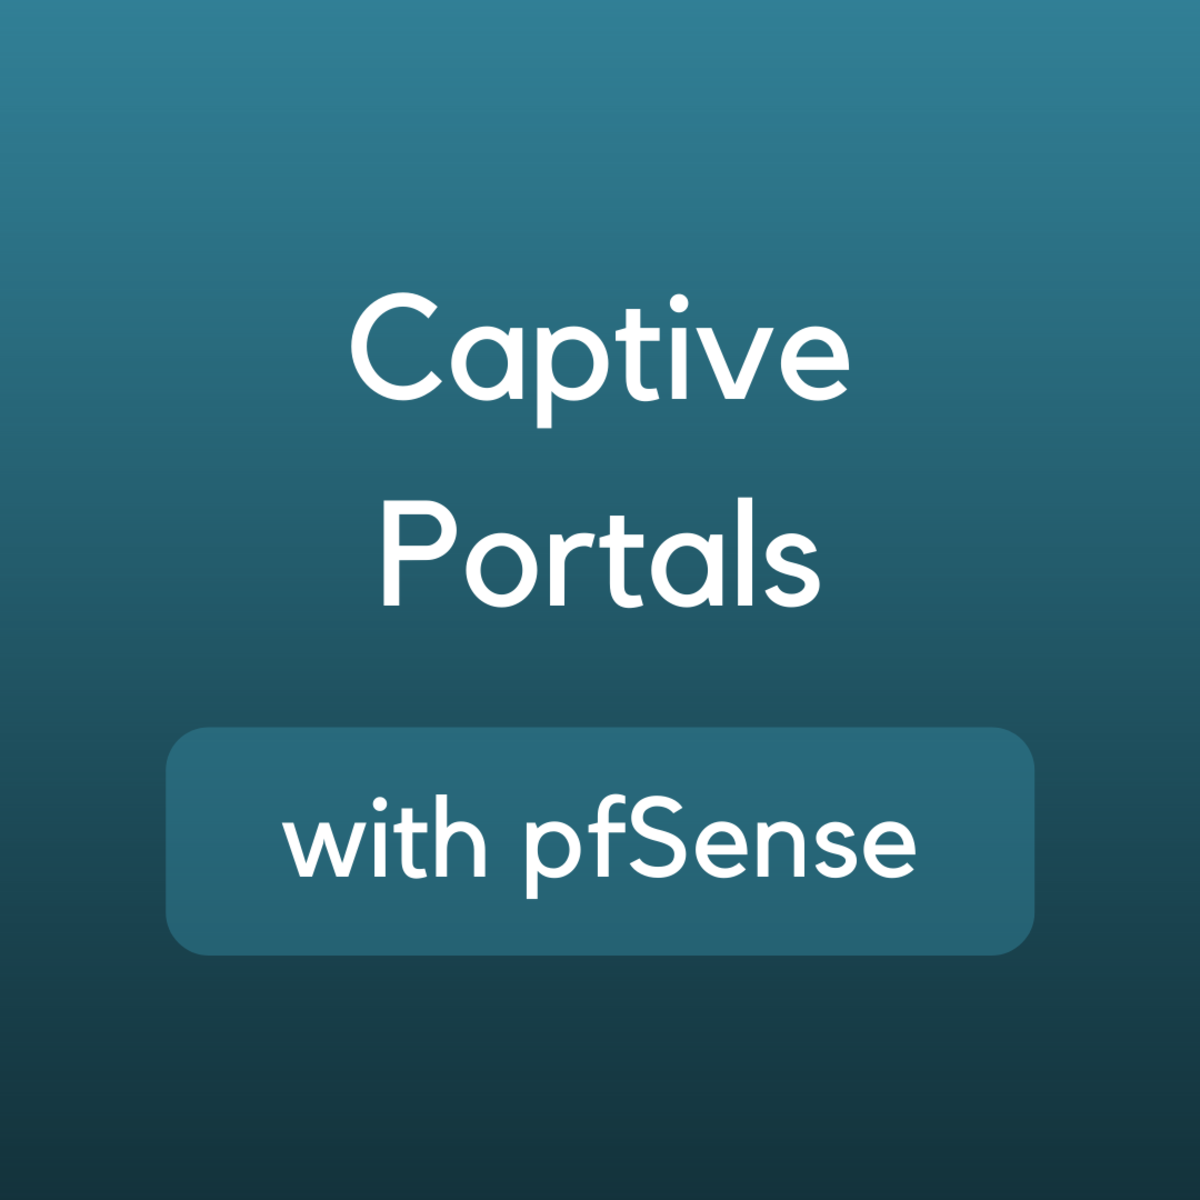 Learn how to use pfSense to set up captive portals.